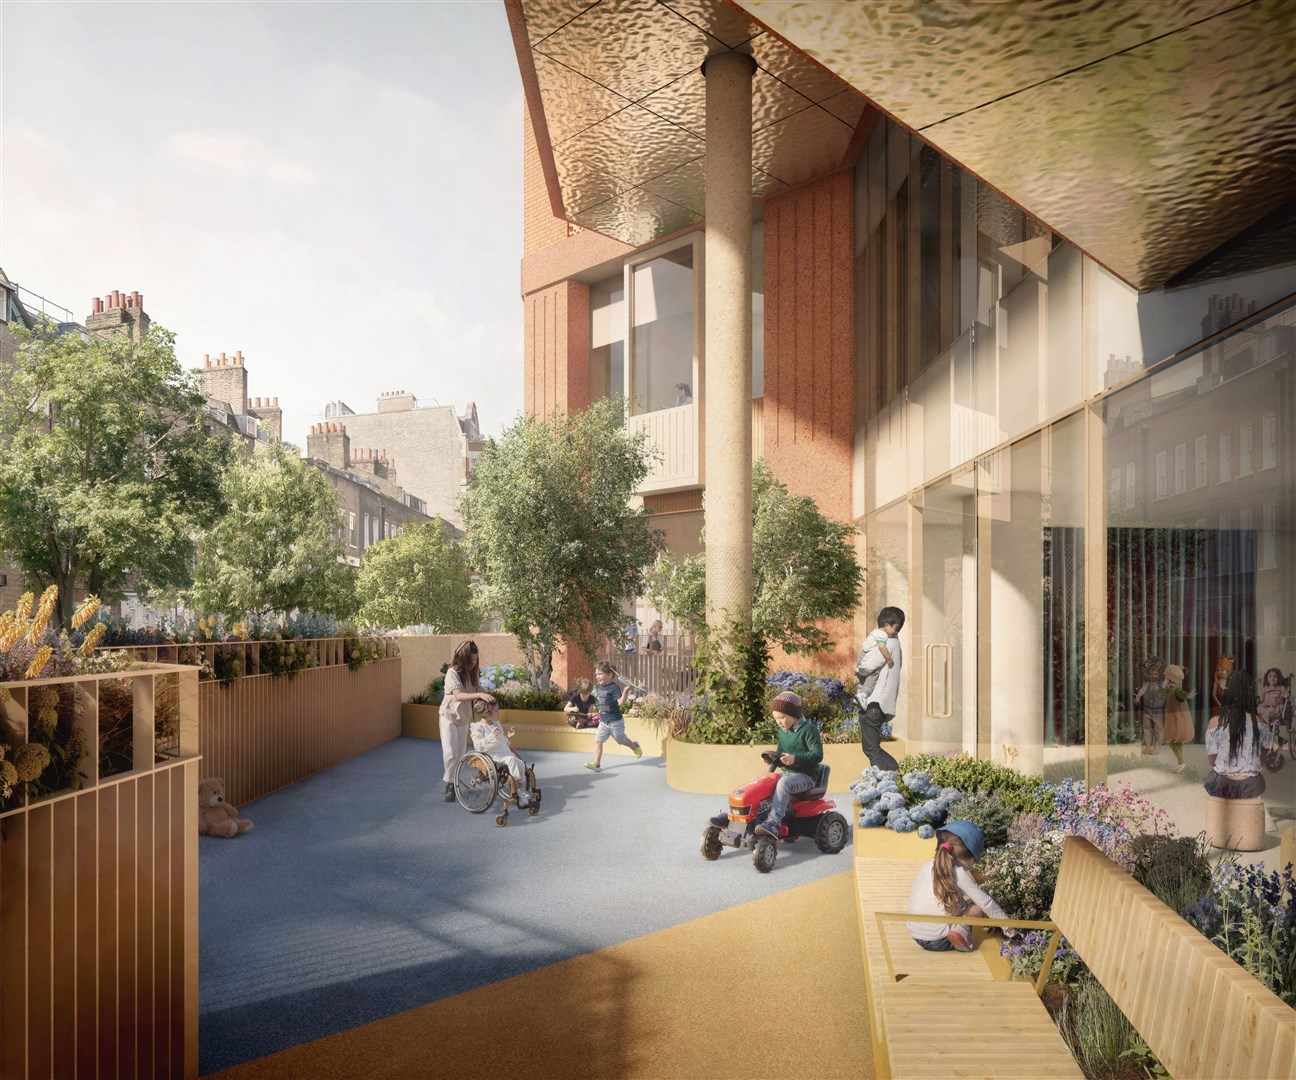 Outdoor spaces will be created for children, families and staff to enjoy at the new Children’s Cancer Centre (GOSH/PA)